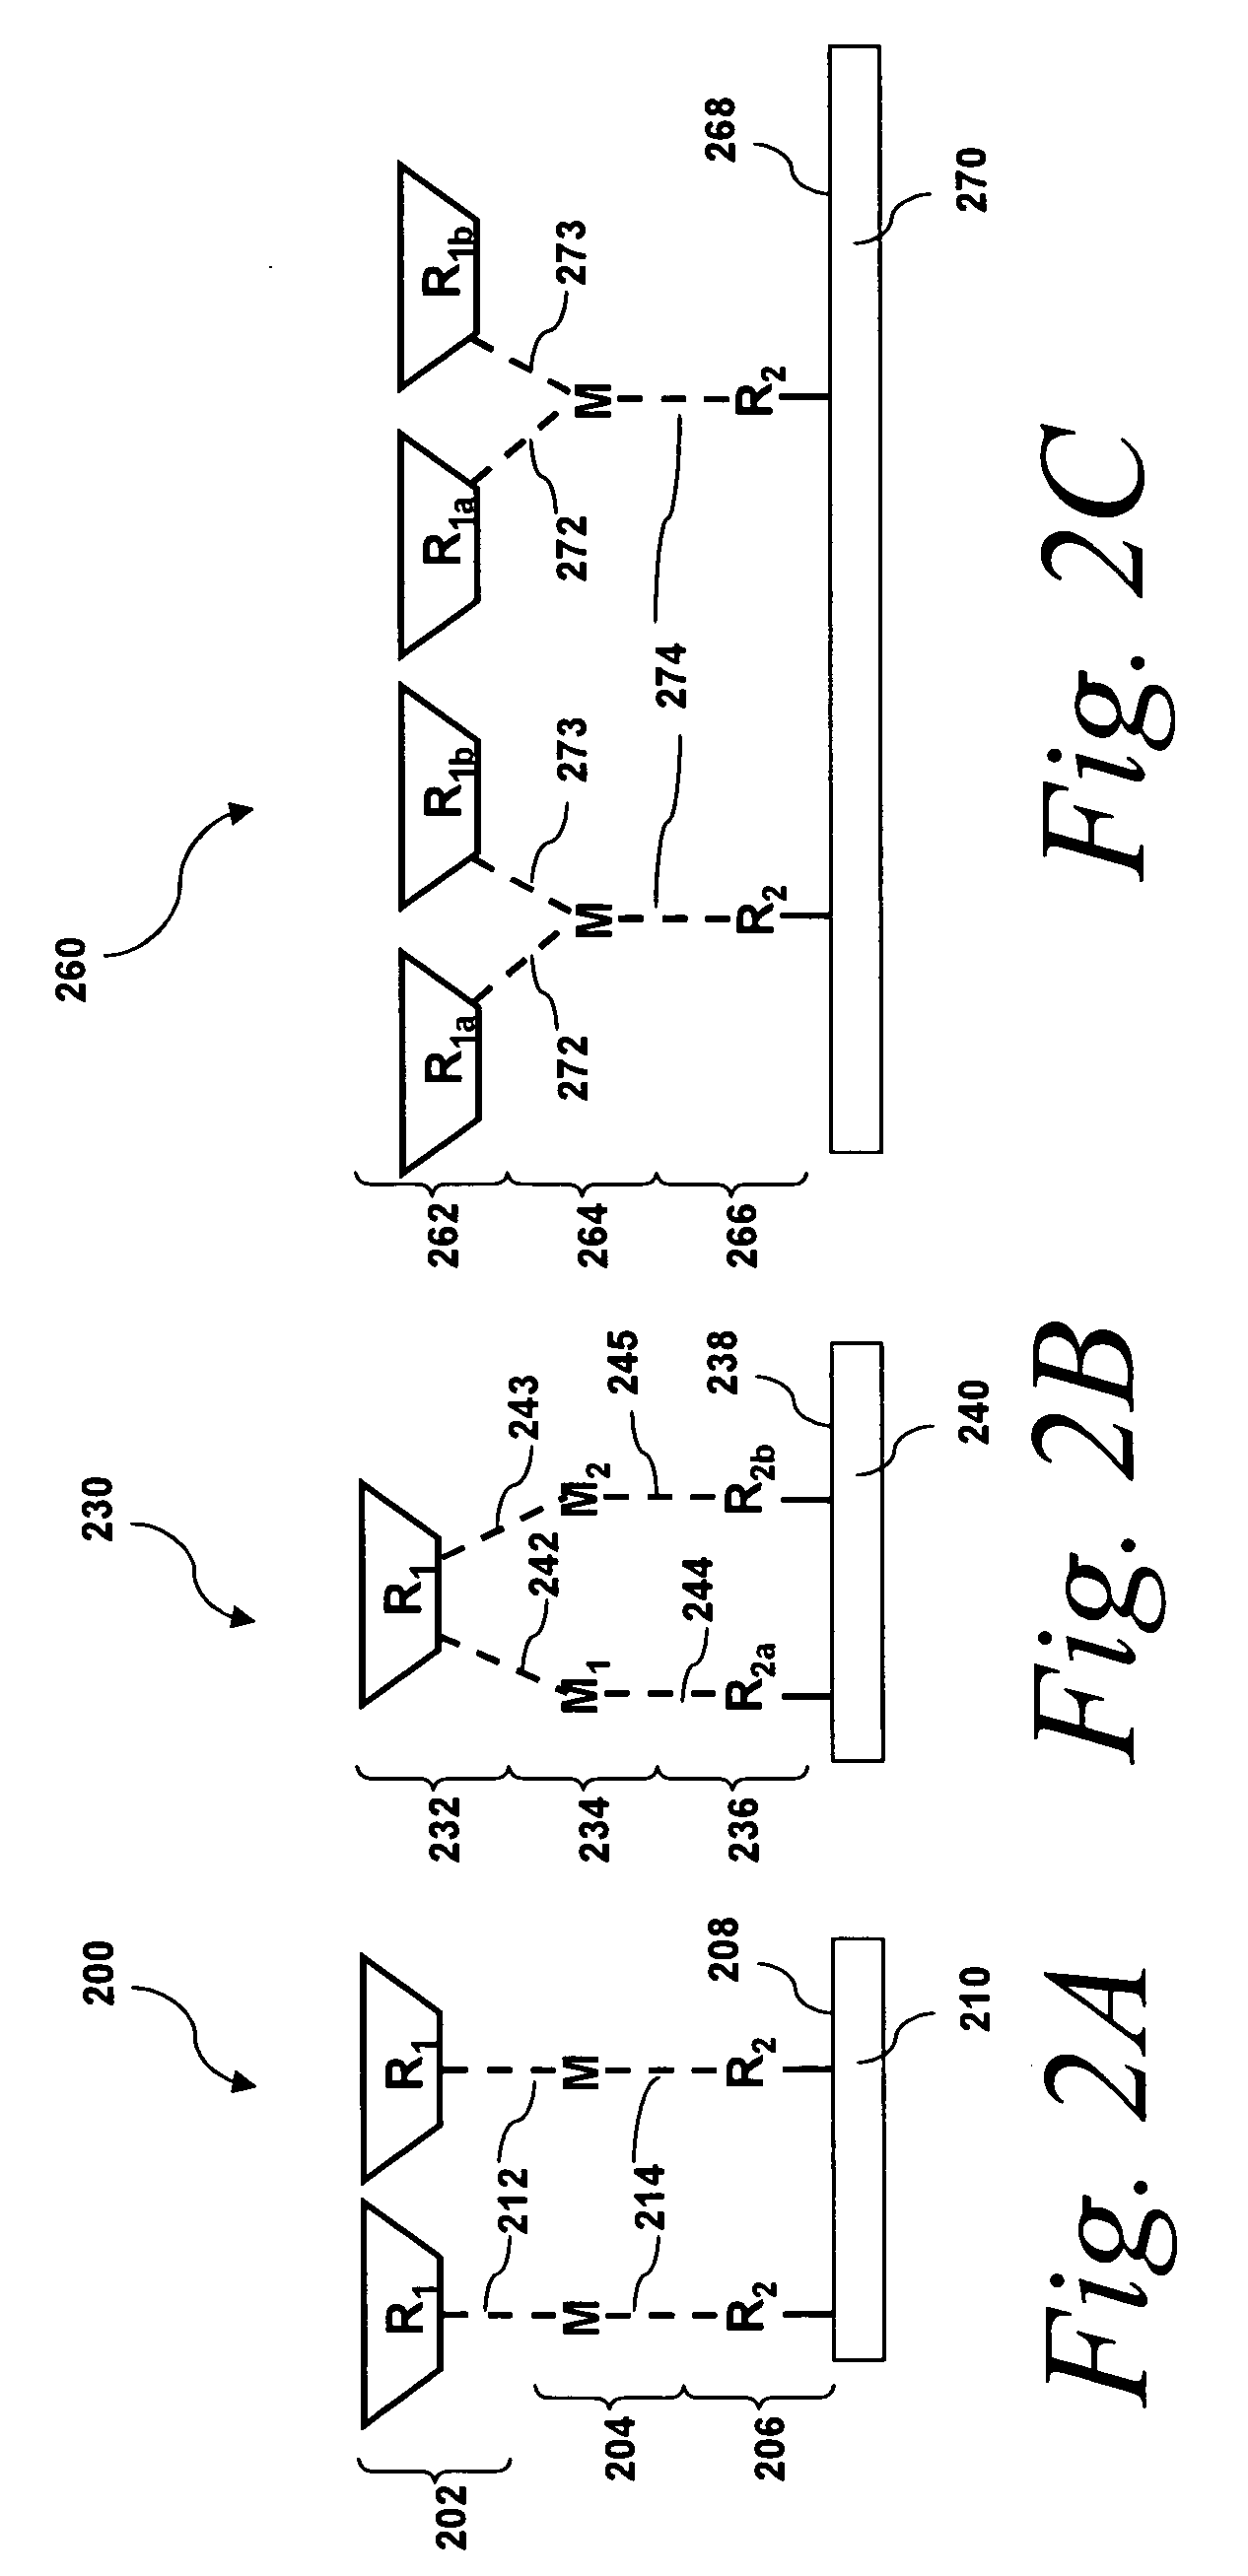 Films with photoresponsive wettability